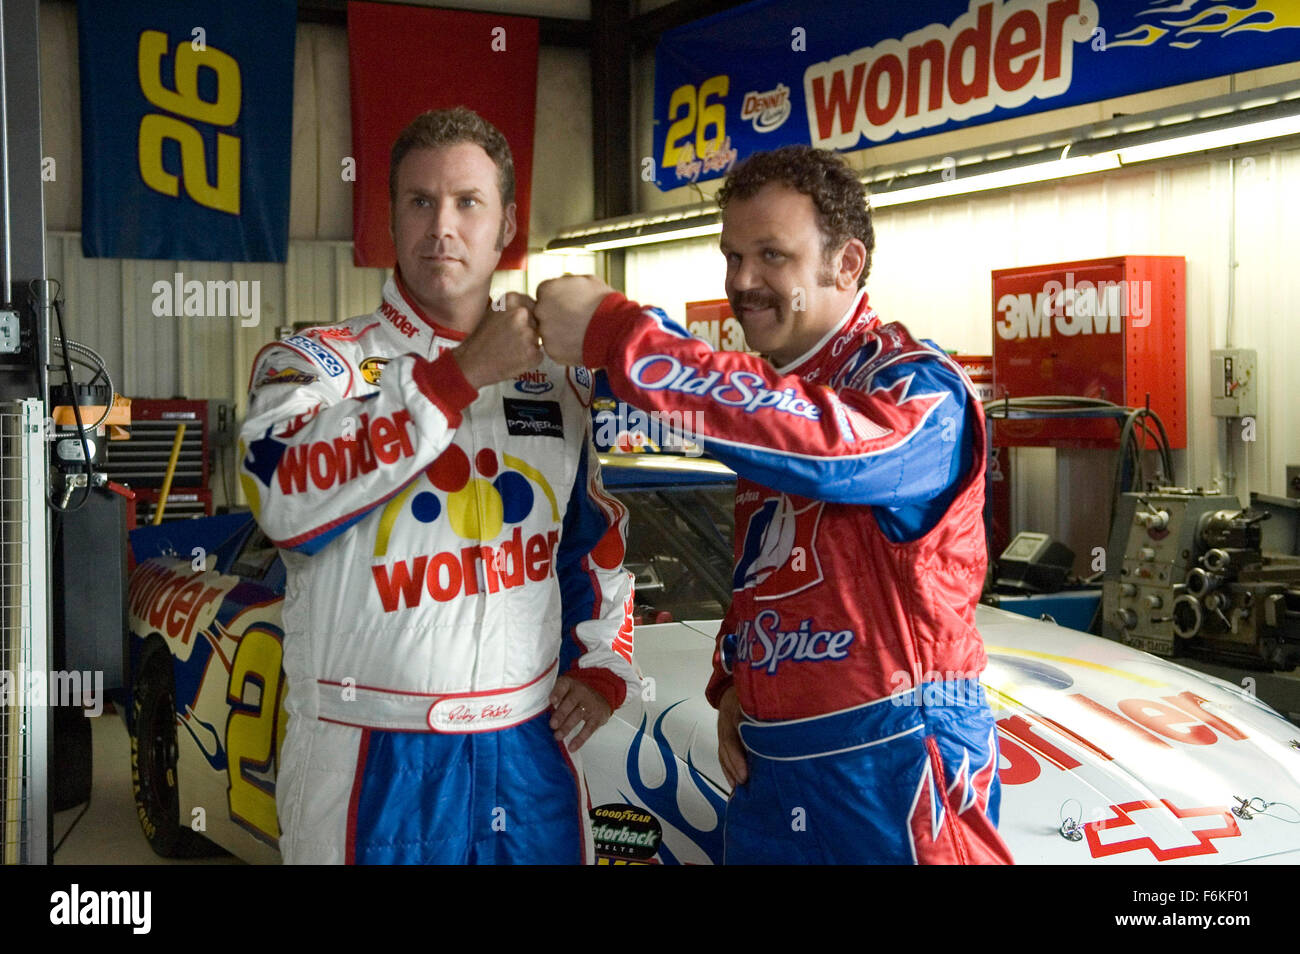 RELEASE DATE: August 4, 2006. MOVIE TITLE: Talladega Nights: The Ballad of Ricky Bobby. STUDIO: Columbia Pictures. PLOT: NASCAR stock car racing sensation Ricky Bobby is a national hero because of his 'win at all costs' approach. He and his loyal racing partner, childhood friend Cal Naughton Jr., are a fearless duo -- 'Shake' and 'Bake' by their fans for their ability to finish so many races in the #1 and #2 positions, with Cal always in second place. PICTURED: WILL FERRELL as Ricky Bobby and JOHN C. REILLY as Cal Naughton Jr. Stock Photo